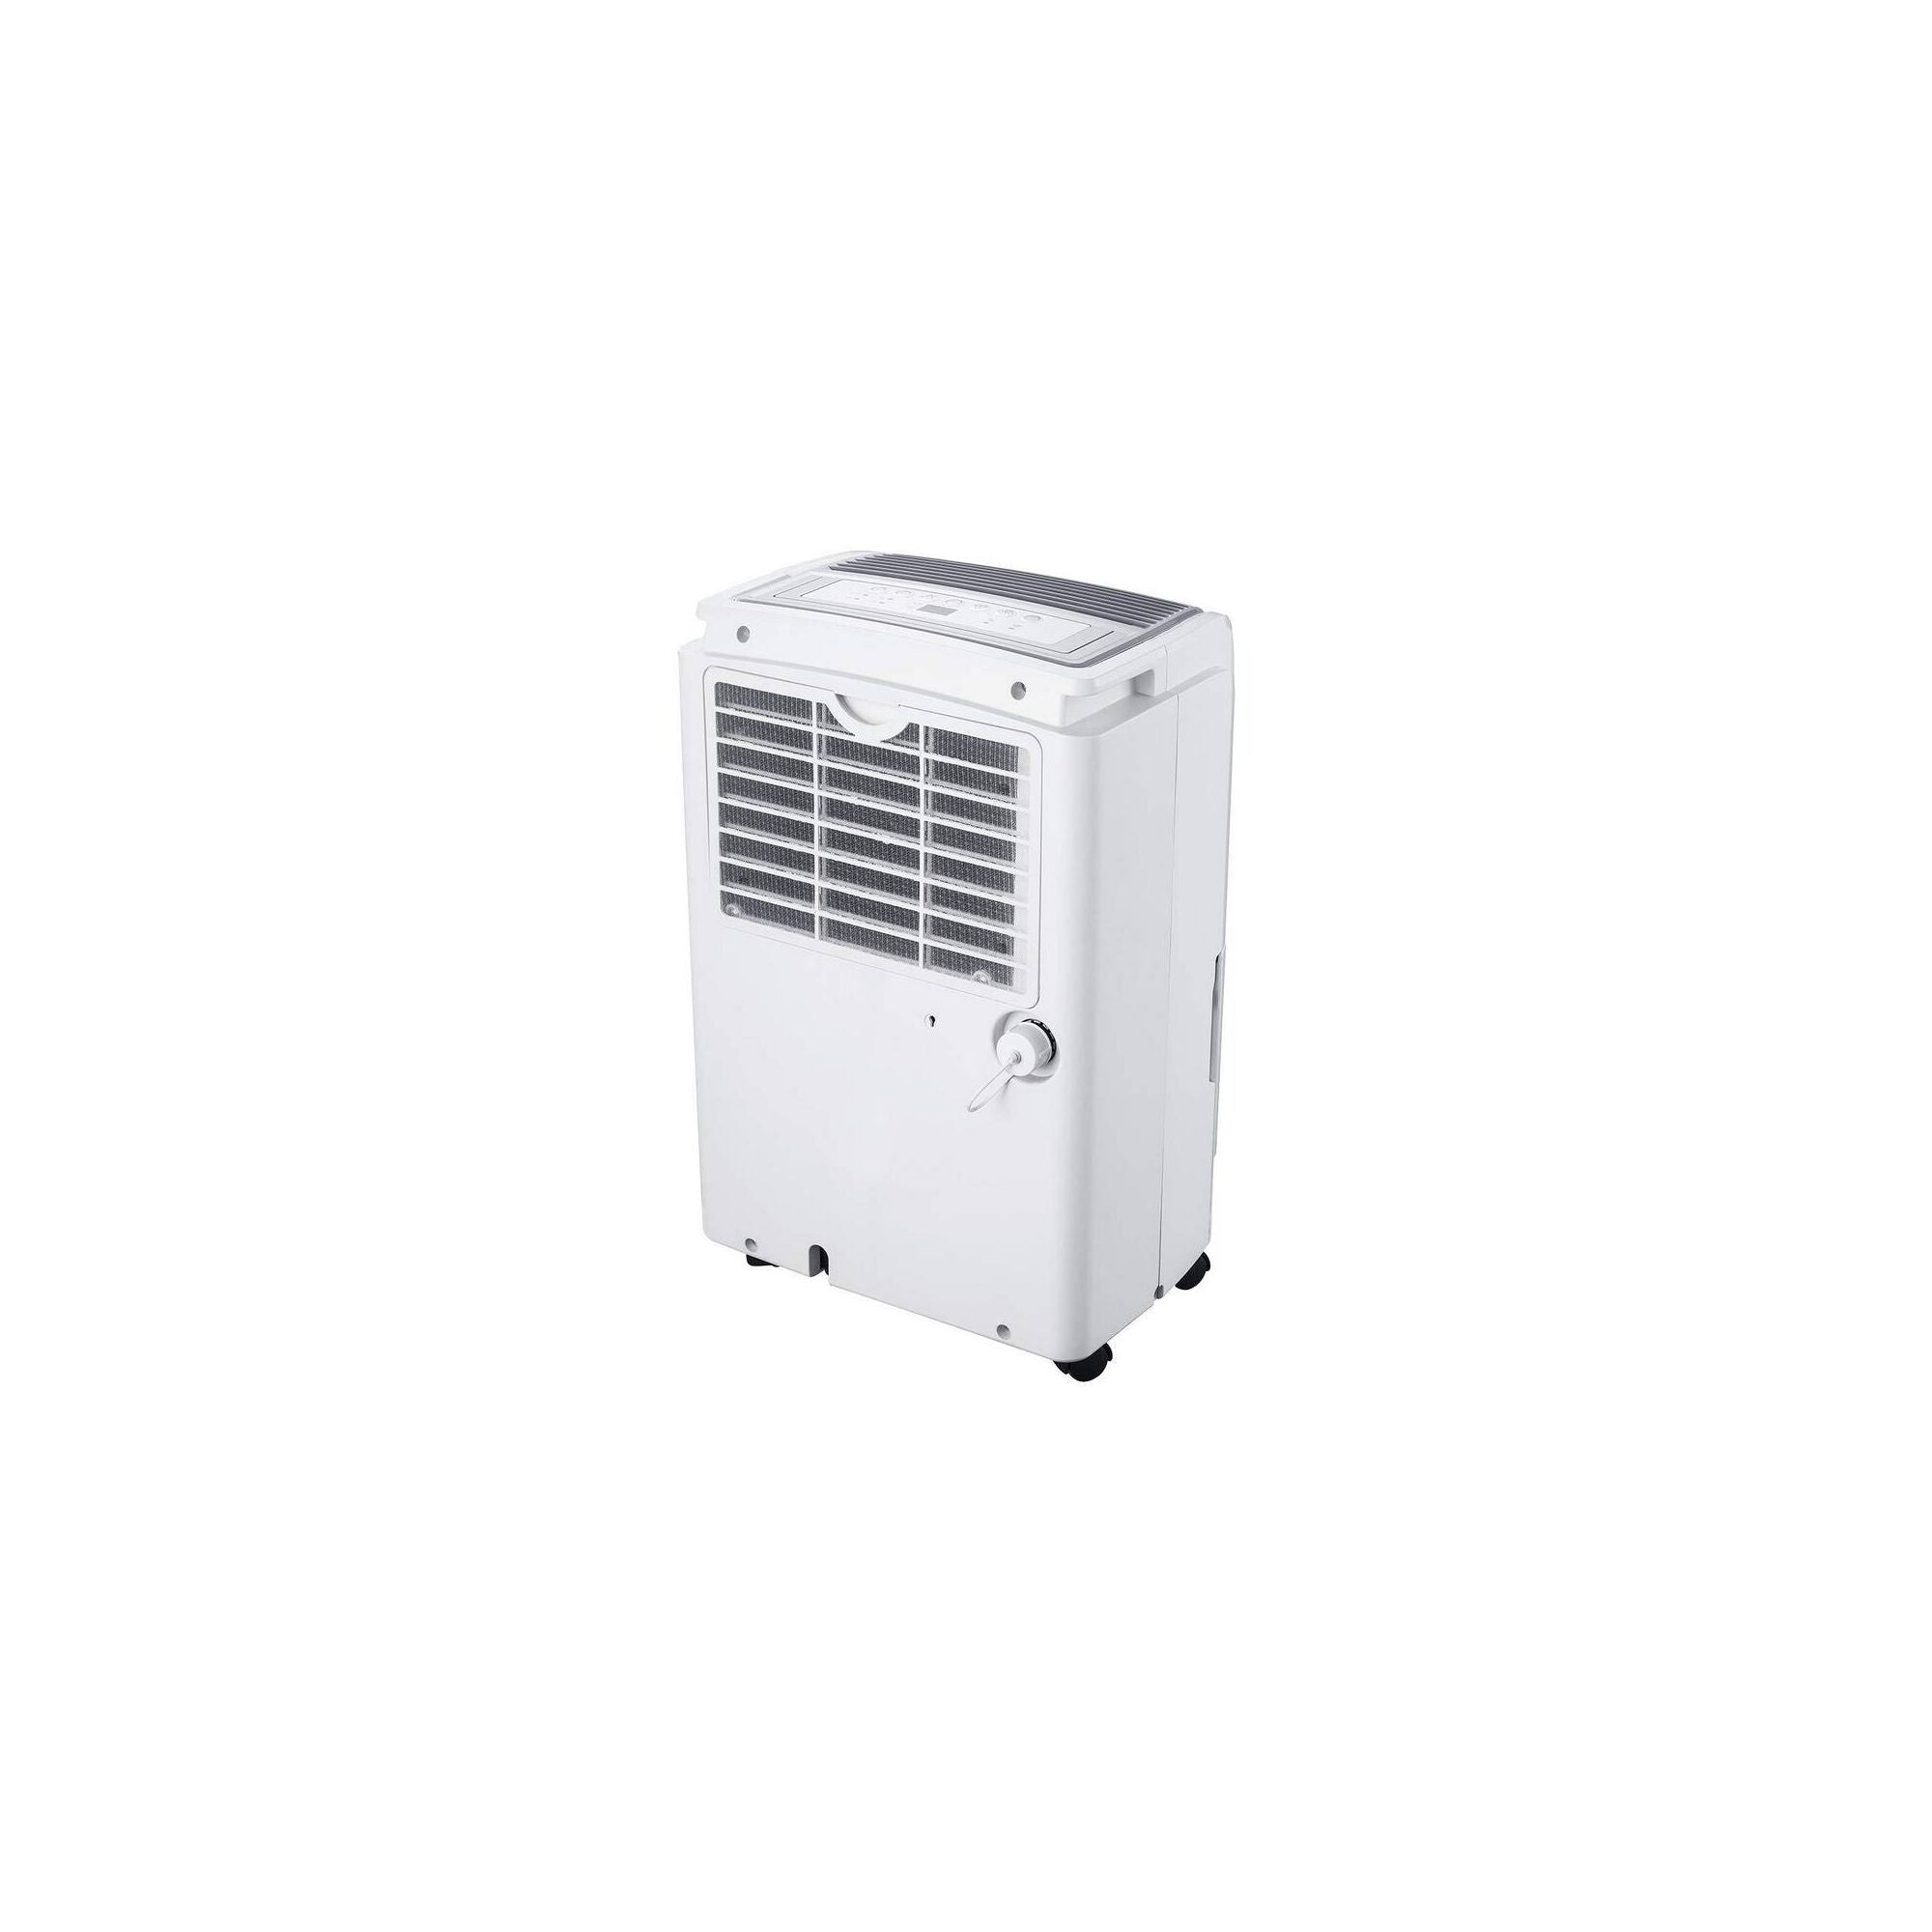 50 Pint ENERY STAR Portable Dehumidifier with LED Display and Built-in Pump and clean filter feature.